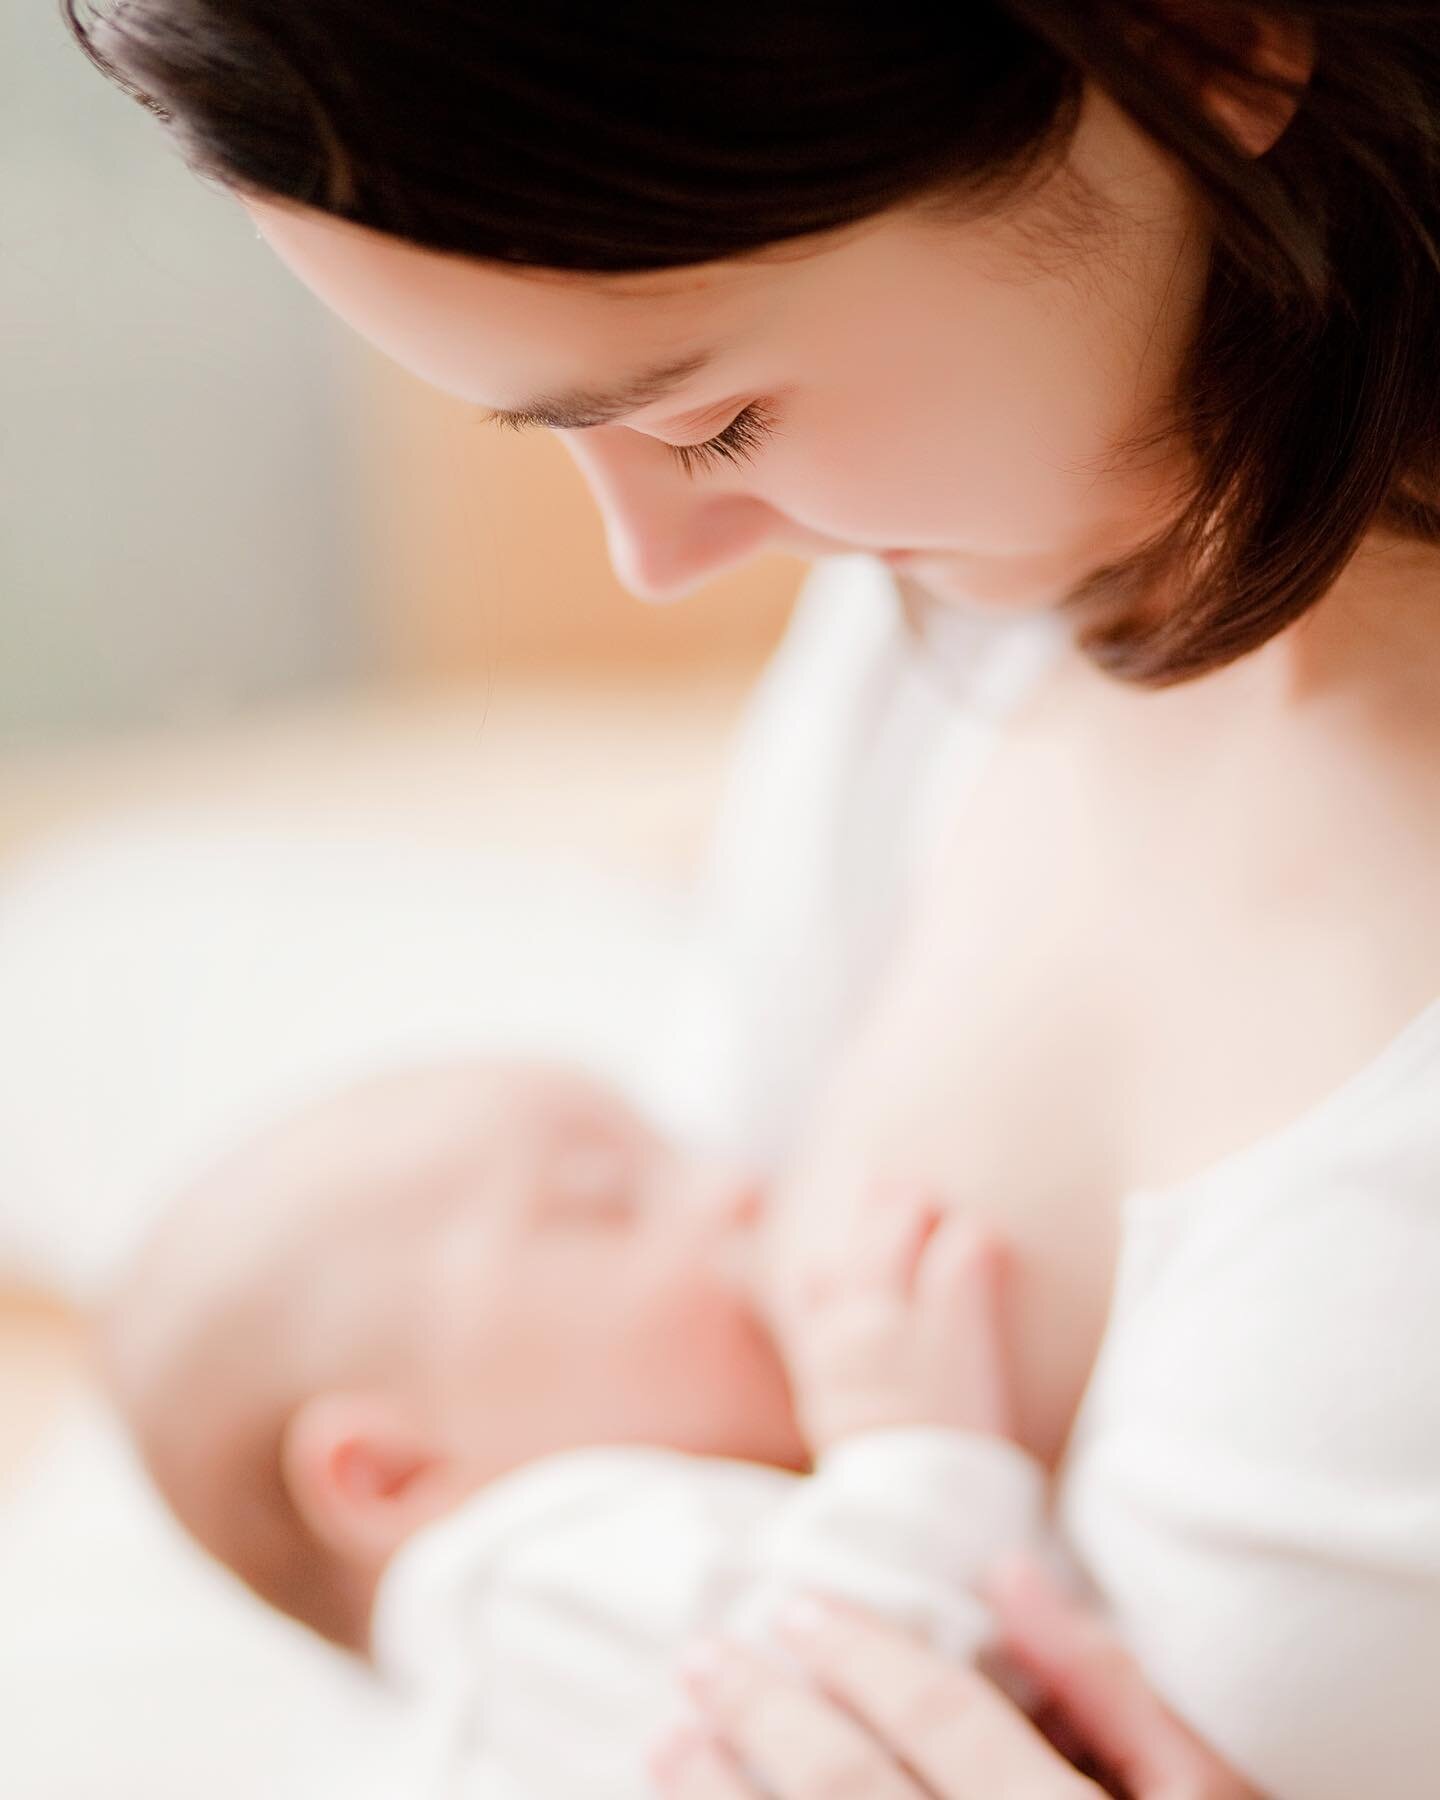 Breastfeeding~ a beautiful bond shared by mother and baby. Why then does it seem to come so effortlessly to some, but can be a struggle for others? 

First things first- breastfeeding is not a one size fits all experience. It takes time and a lot of 